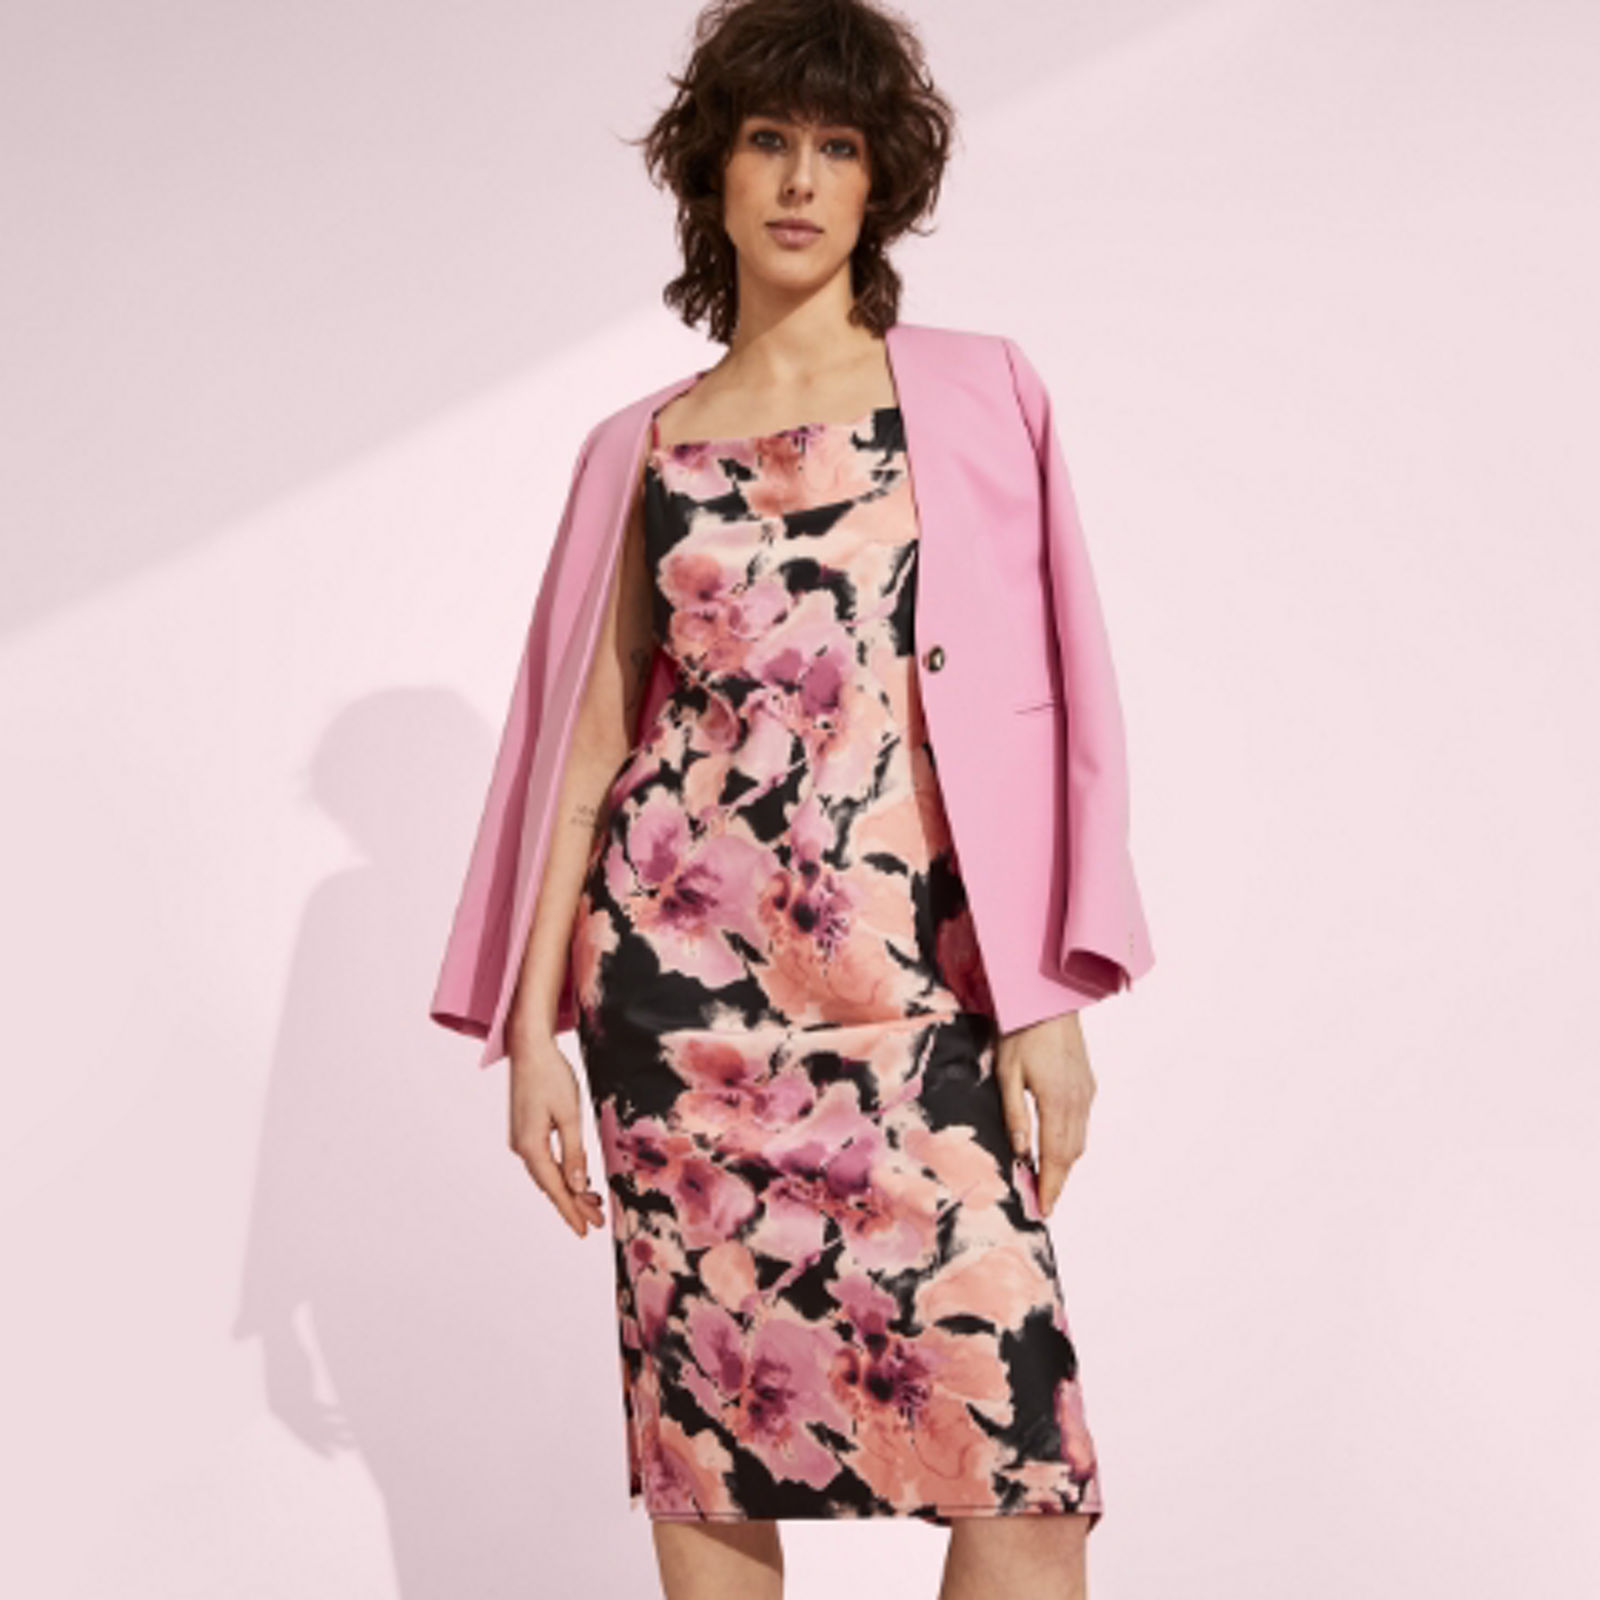 Shop the best deals on Last Act women's clothing at macys.com for